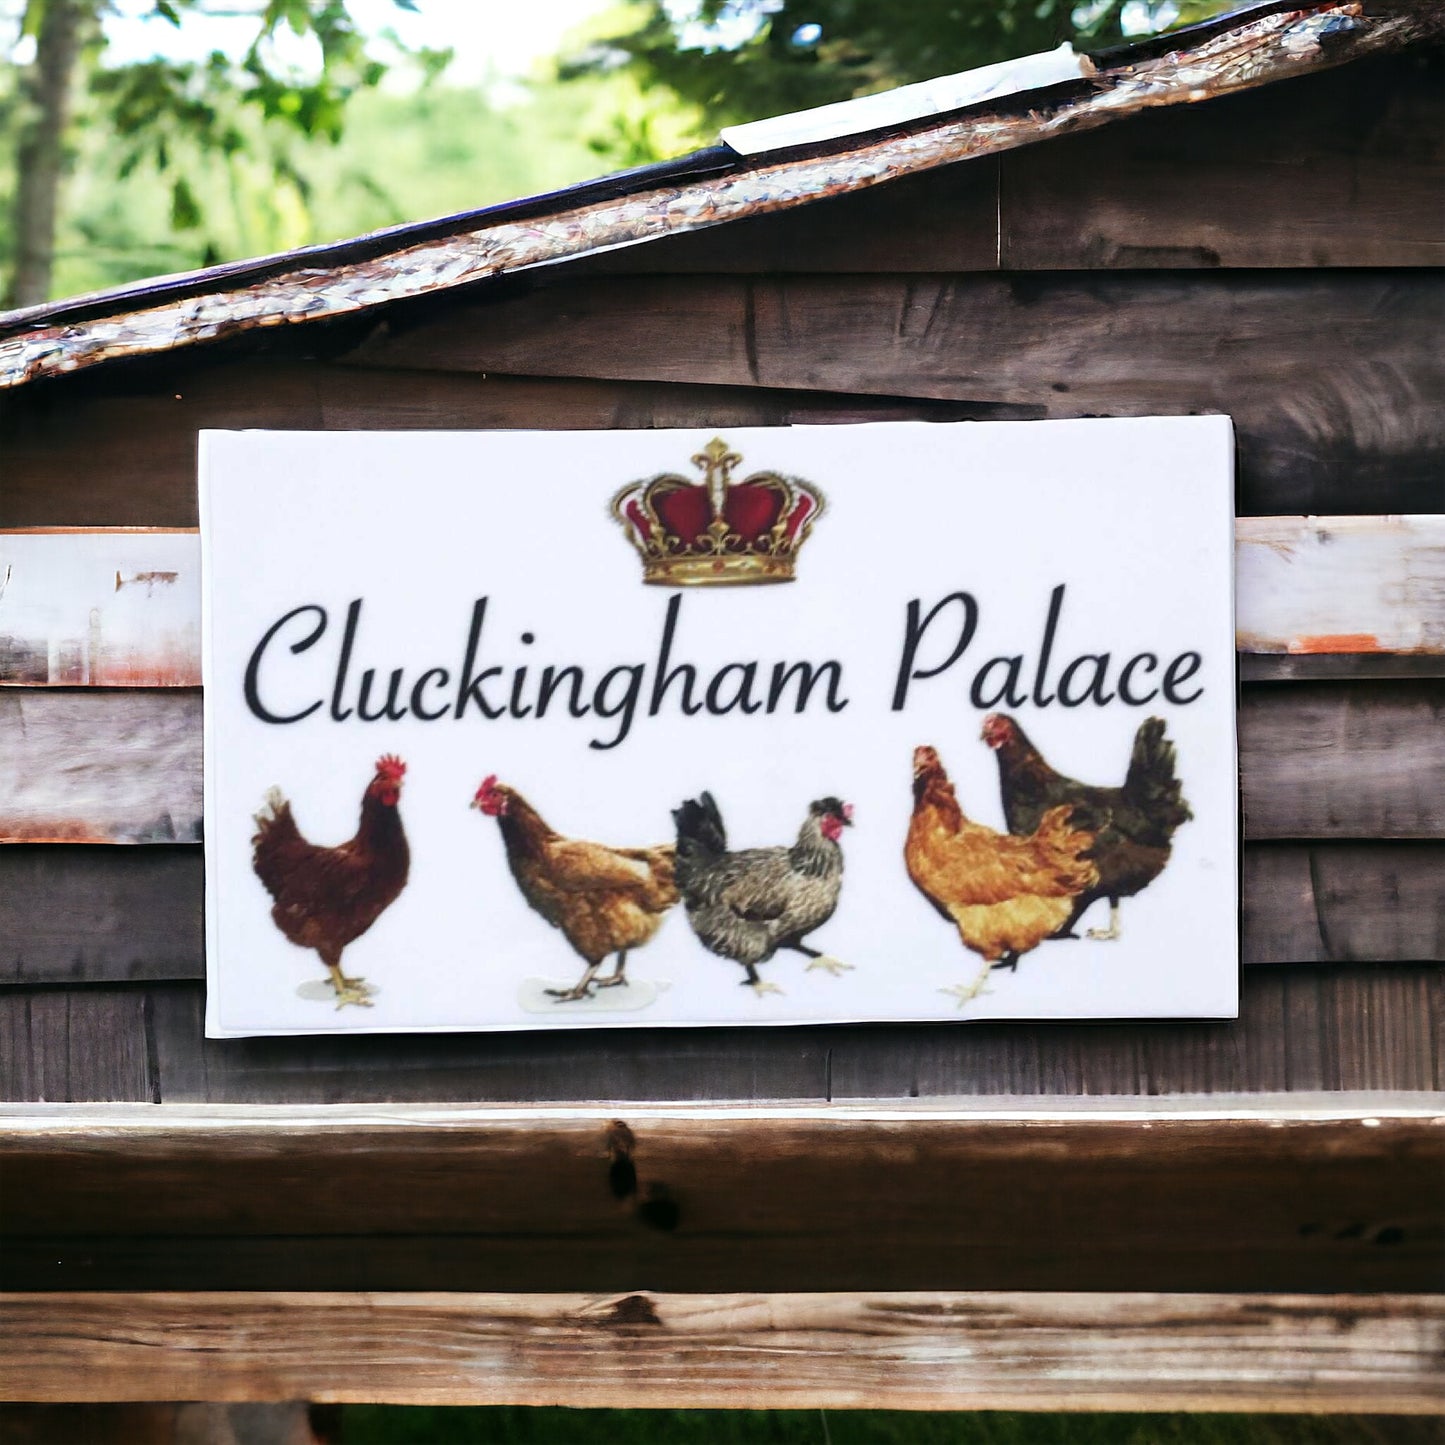 Cluckingham Palace Chicken Coop Sign - The Renmy Store Homewares & Gifts 